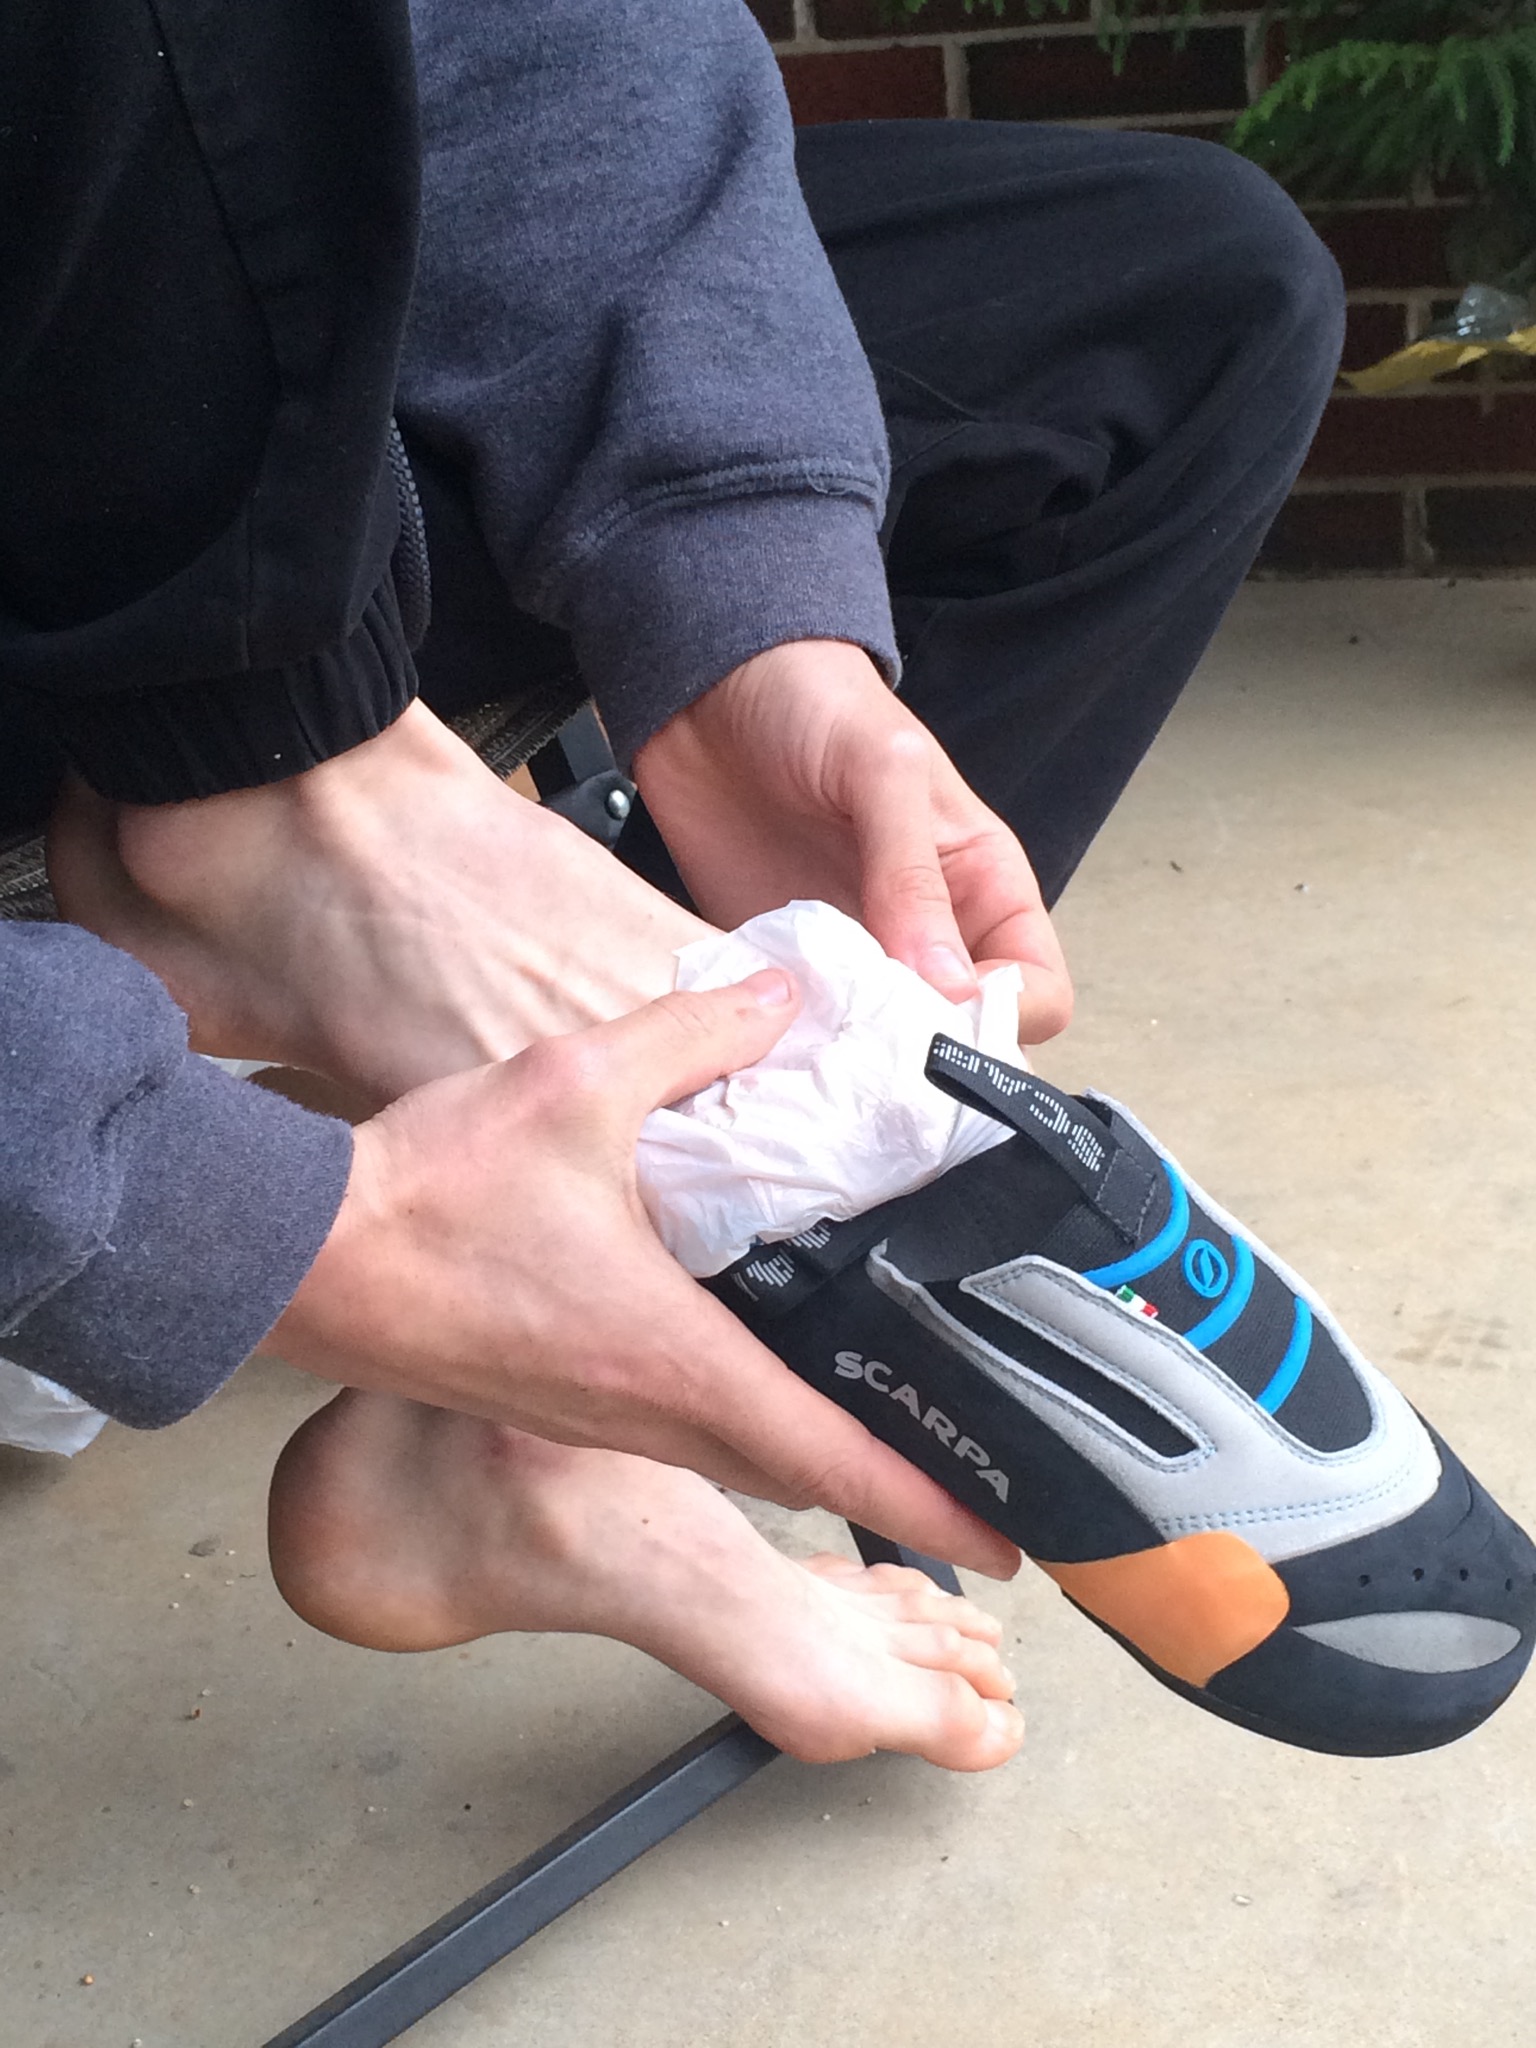 The Learning Curve: The Fix for Painful Climbing Shoes